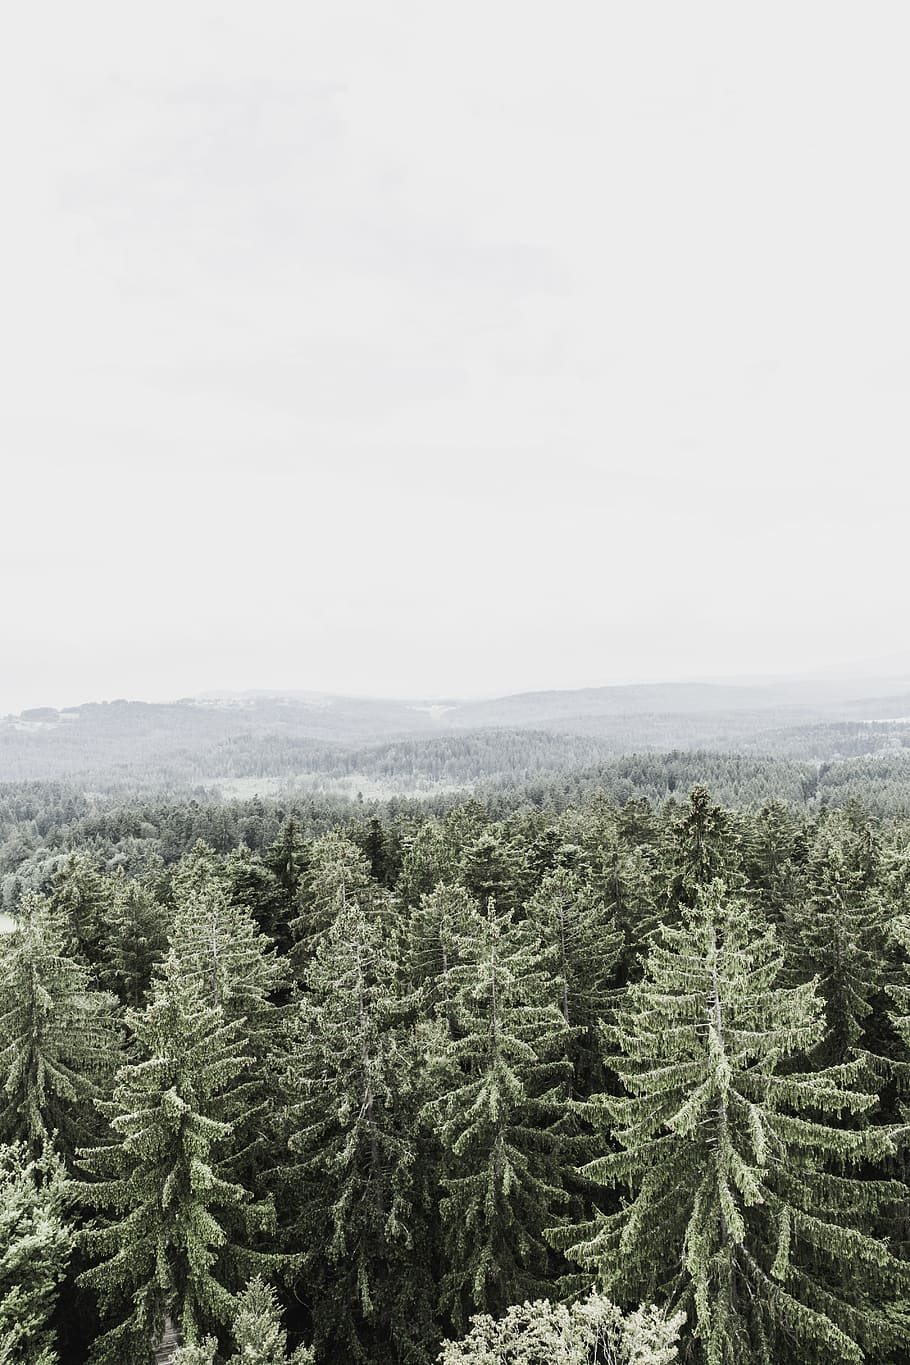 Forest, Hill, Mountains, Landscape, forest, hill, meadow, green, nature, sky, outlook